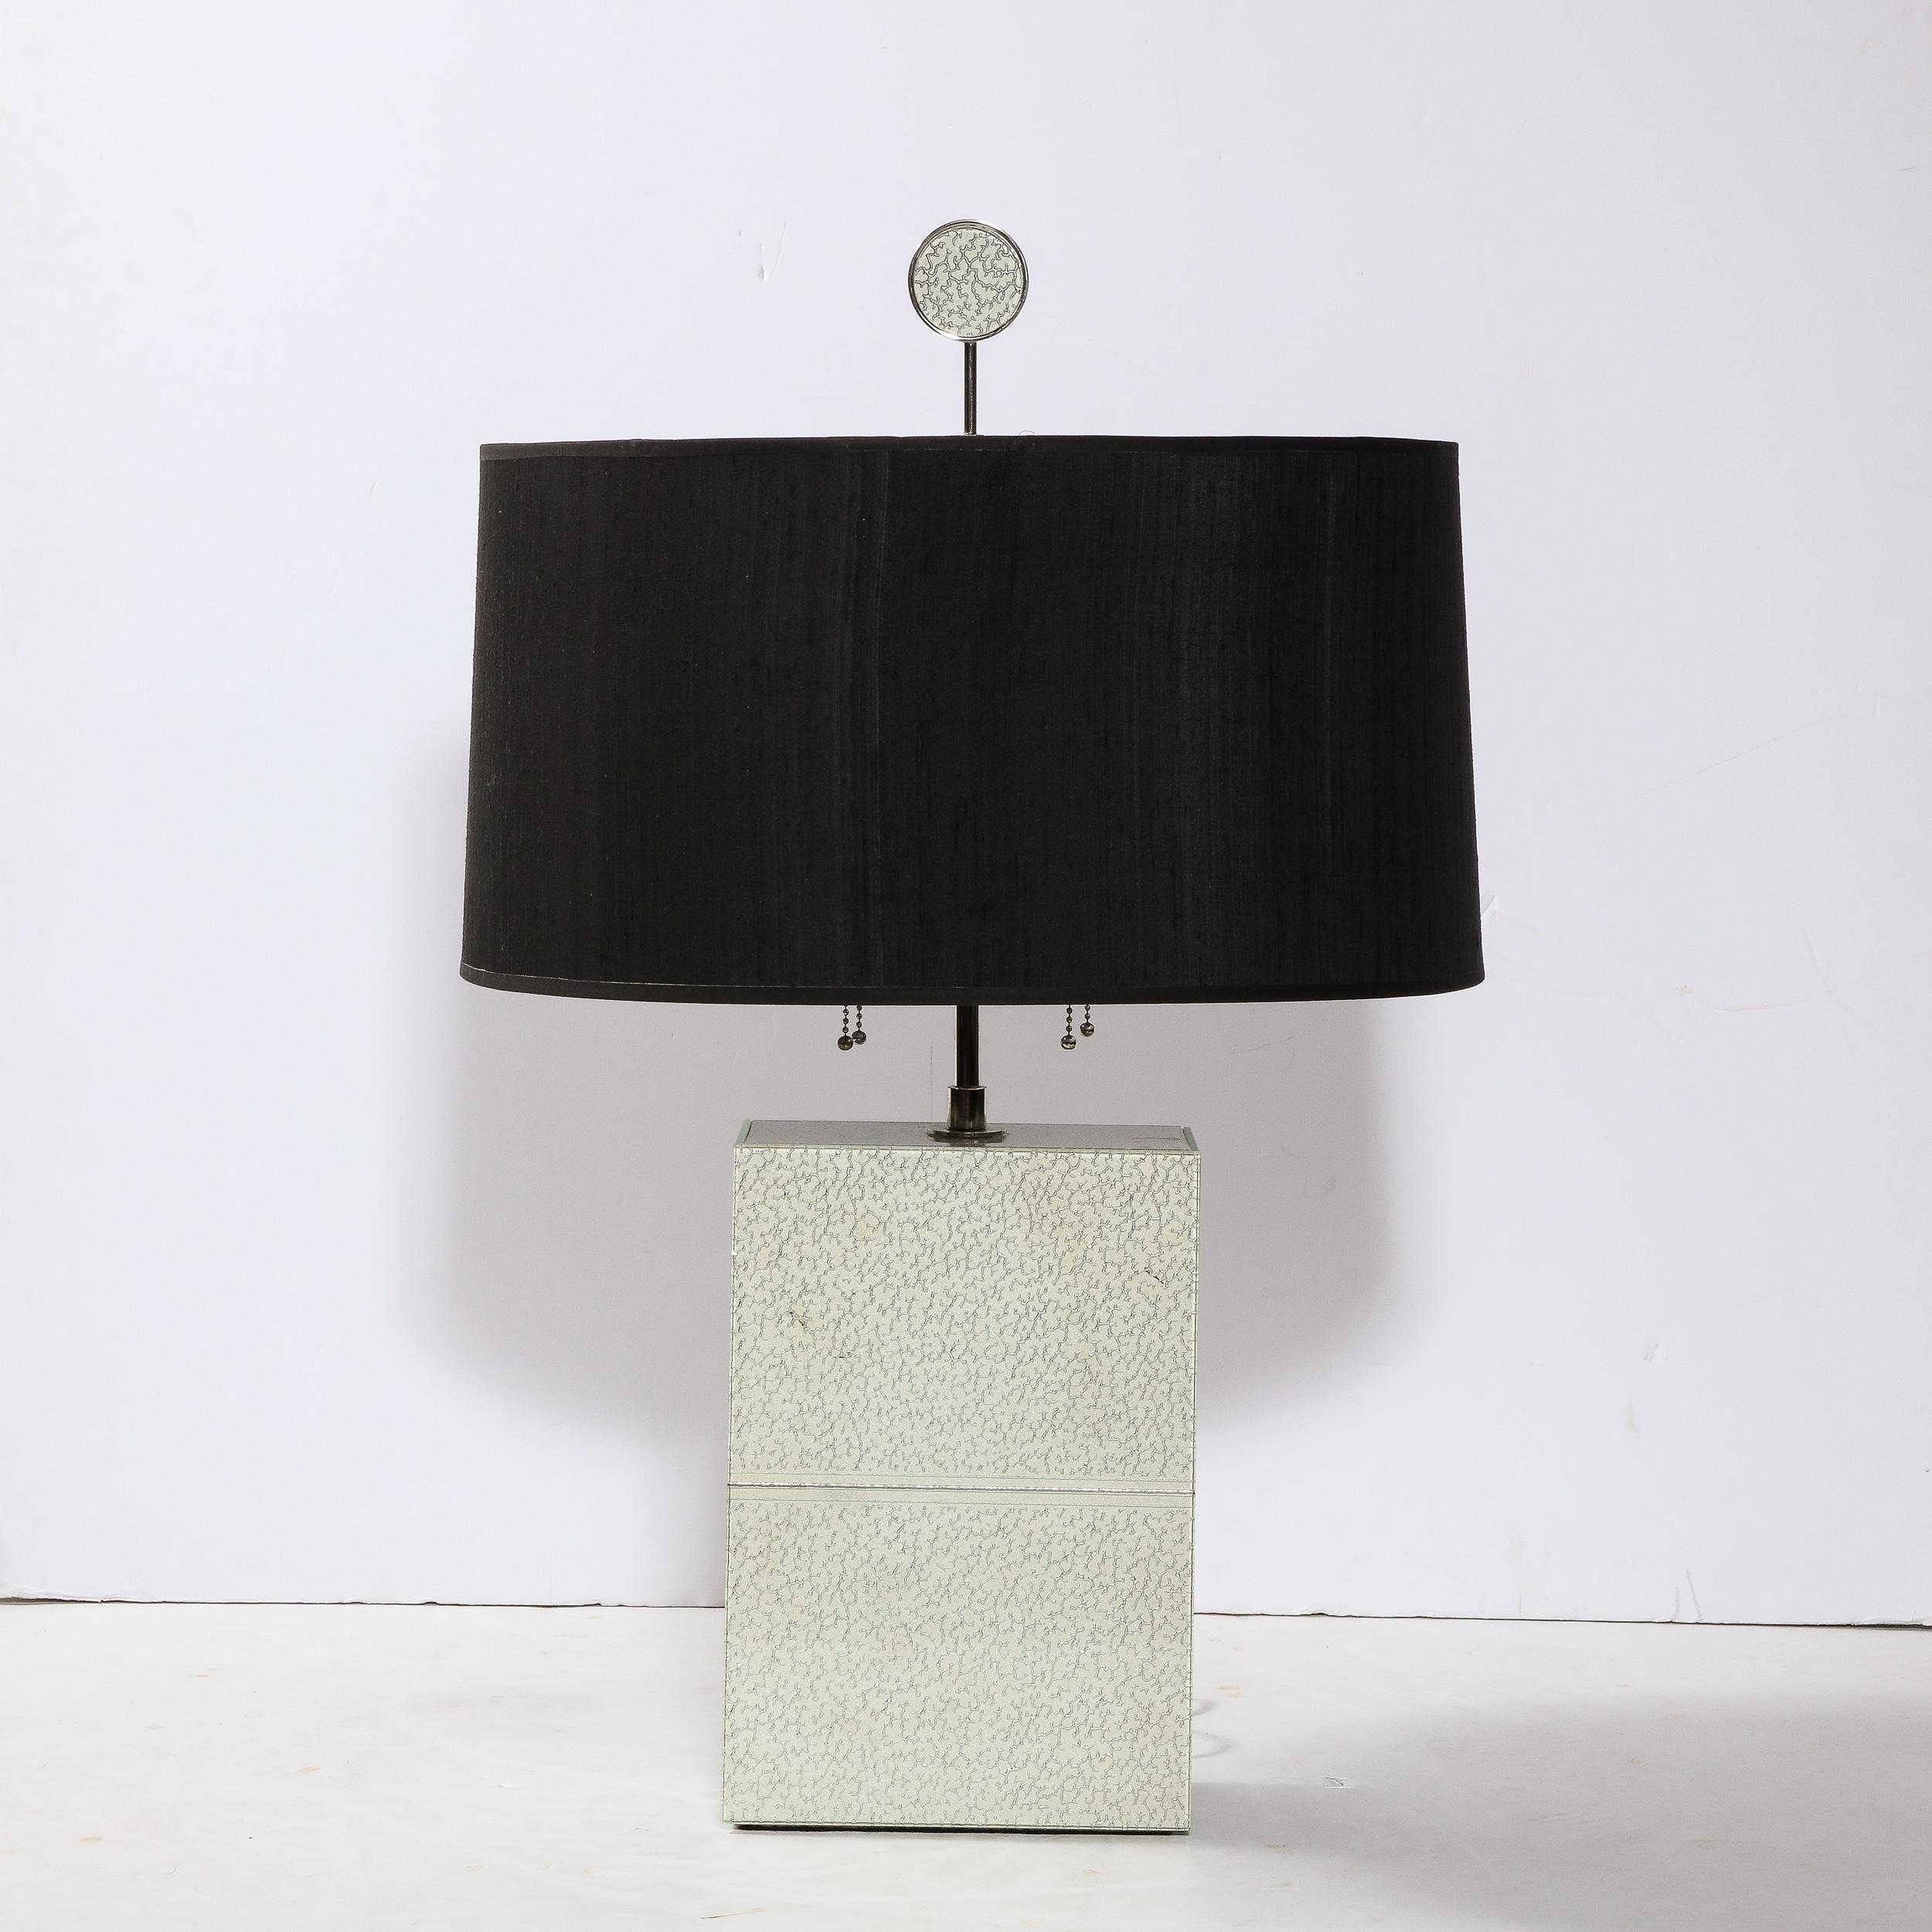 This beautiful modernist table lamp was realized by the celebrated contemporary designer Robert Rida in Italy circa 2000. The piece features a volumetric rectilinear form in frosted glass that offers beautiful inflections of acquamarine and a